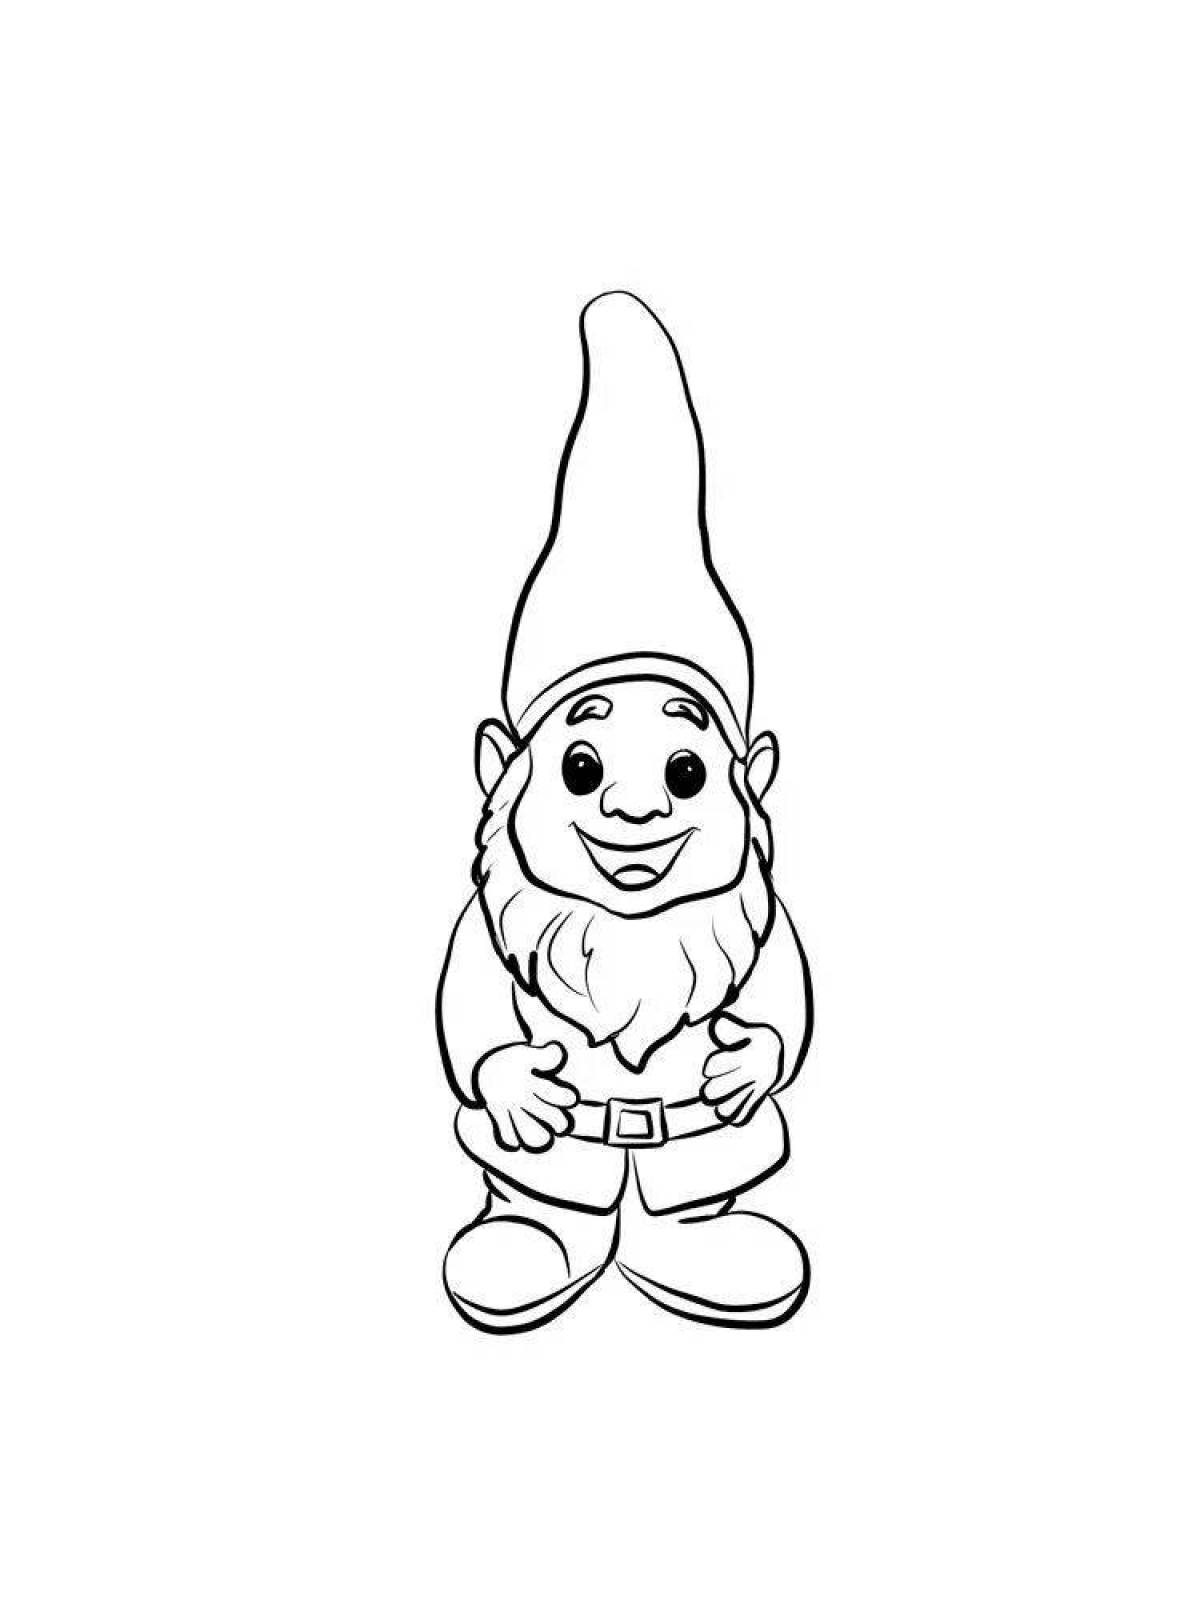 Incredible gnome coloring book for kids